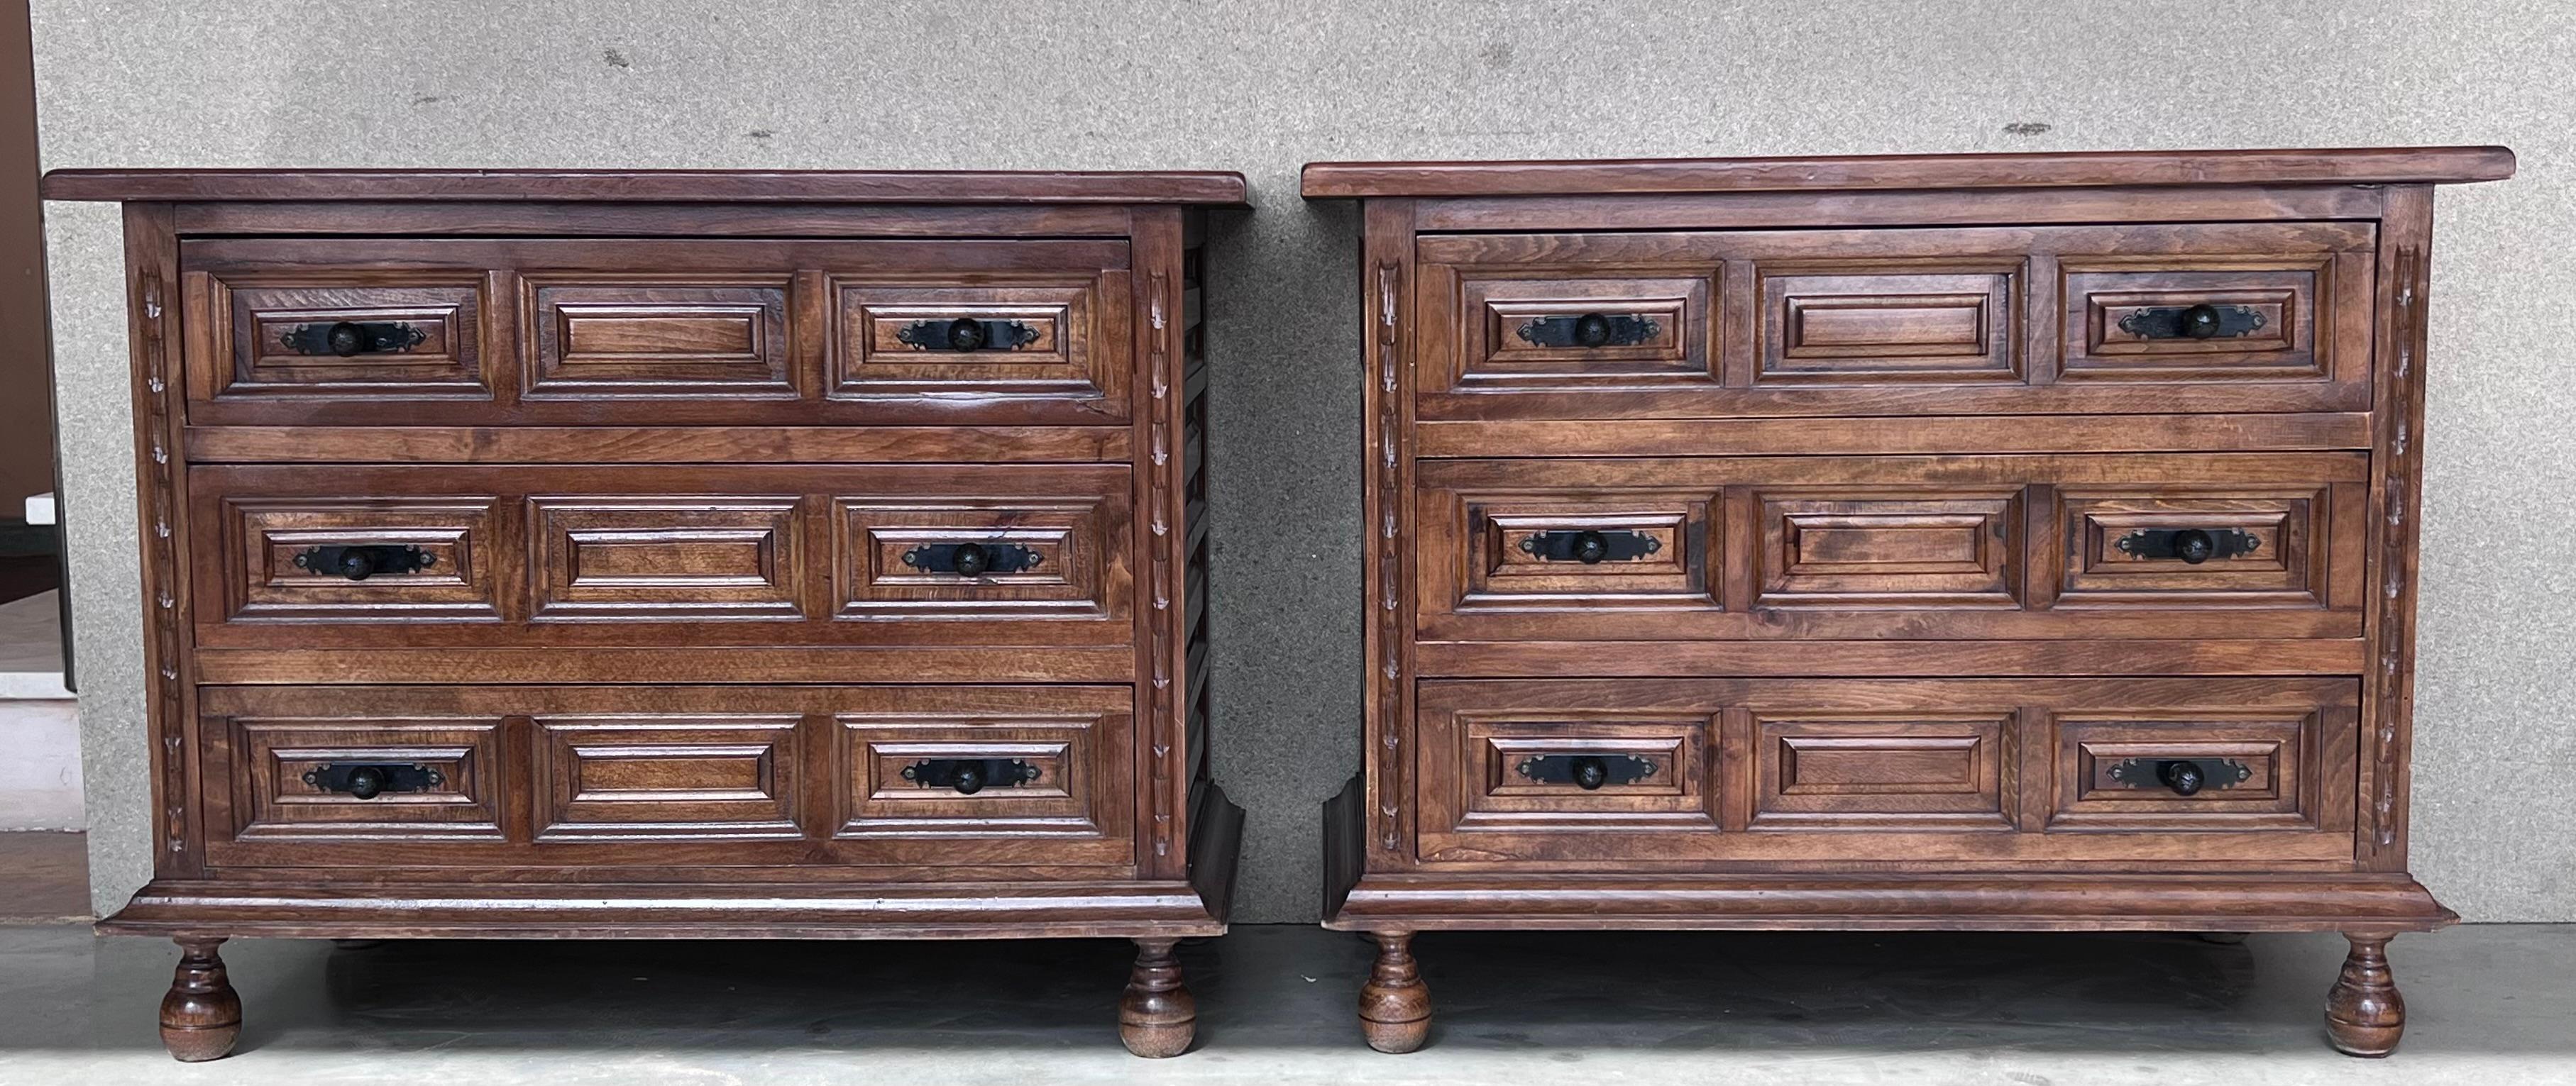 From Northern Spain, constructed of solid walnut, the rectangular top with molded edge atop a conforming case housing three drawers paneled with solid walnut, raised on four round legs.
Carved on the molding sides of the front and original iron